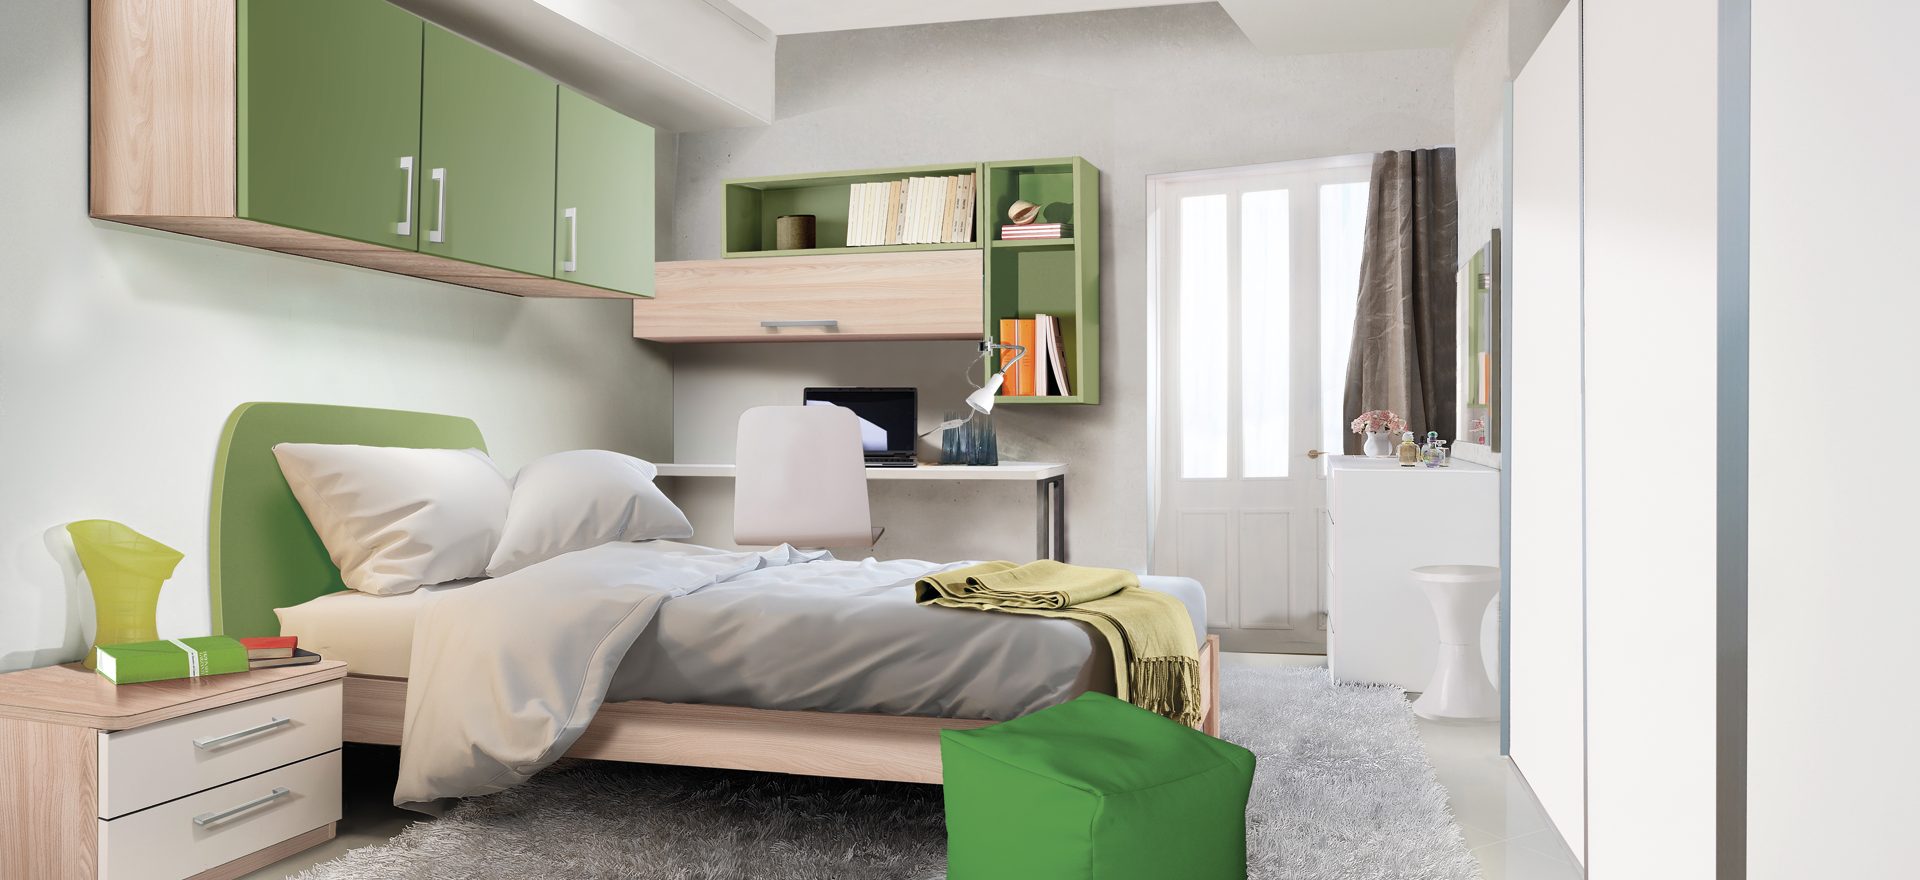 bedroom-furniture-young-olmo-green-white